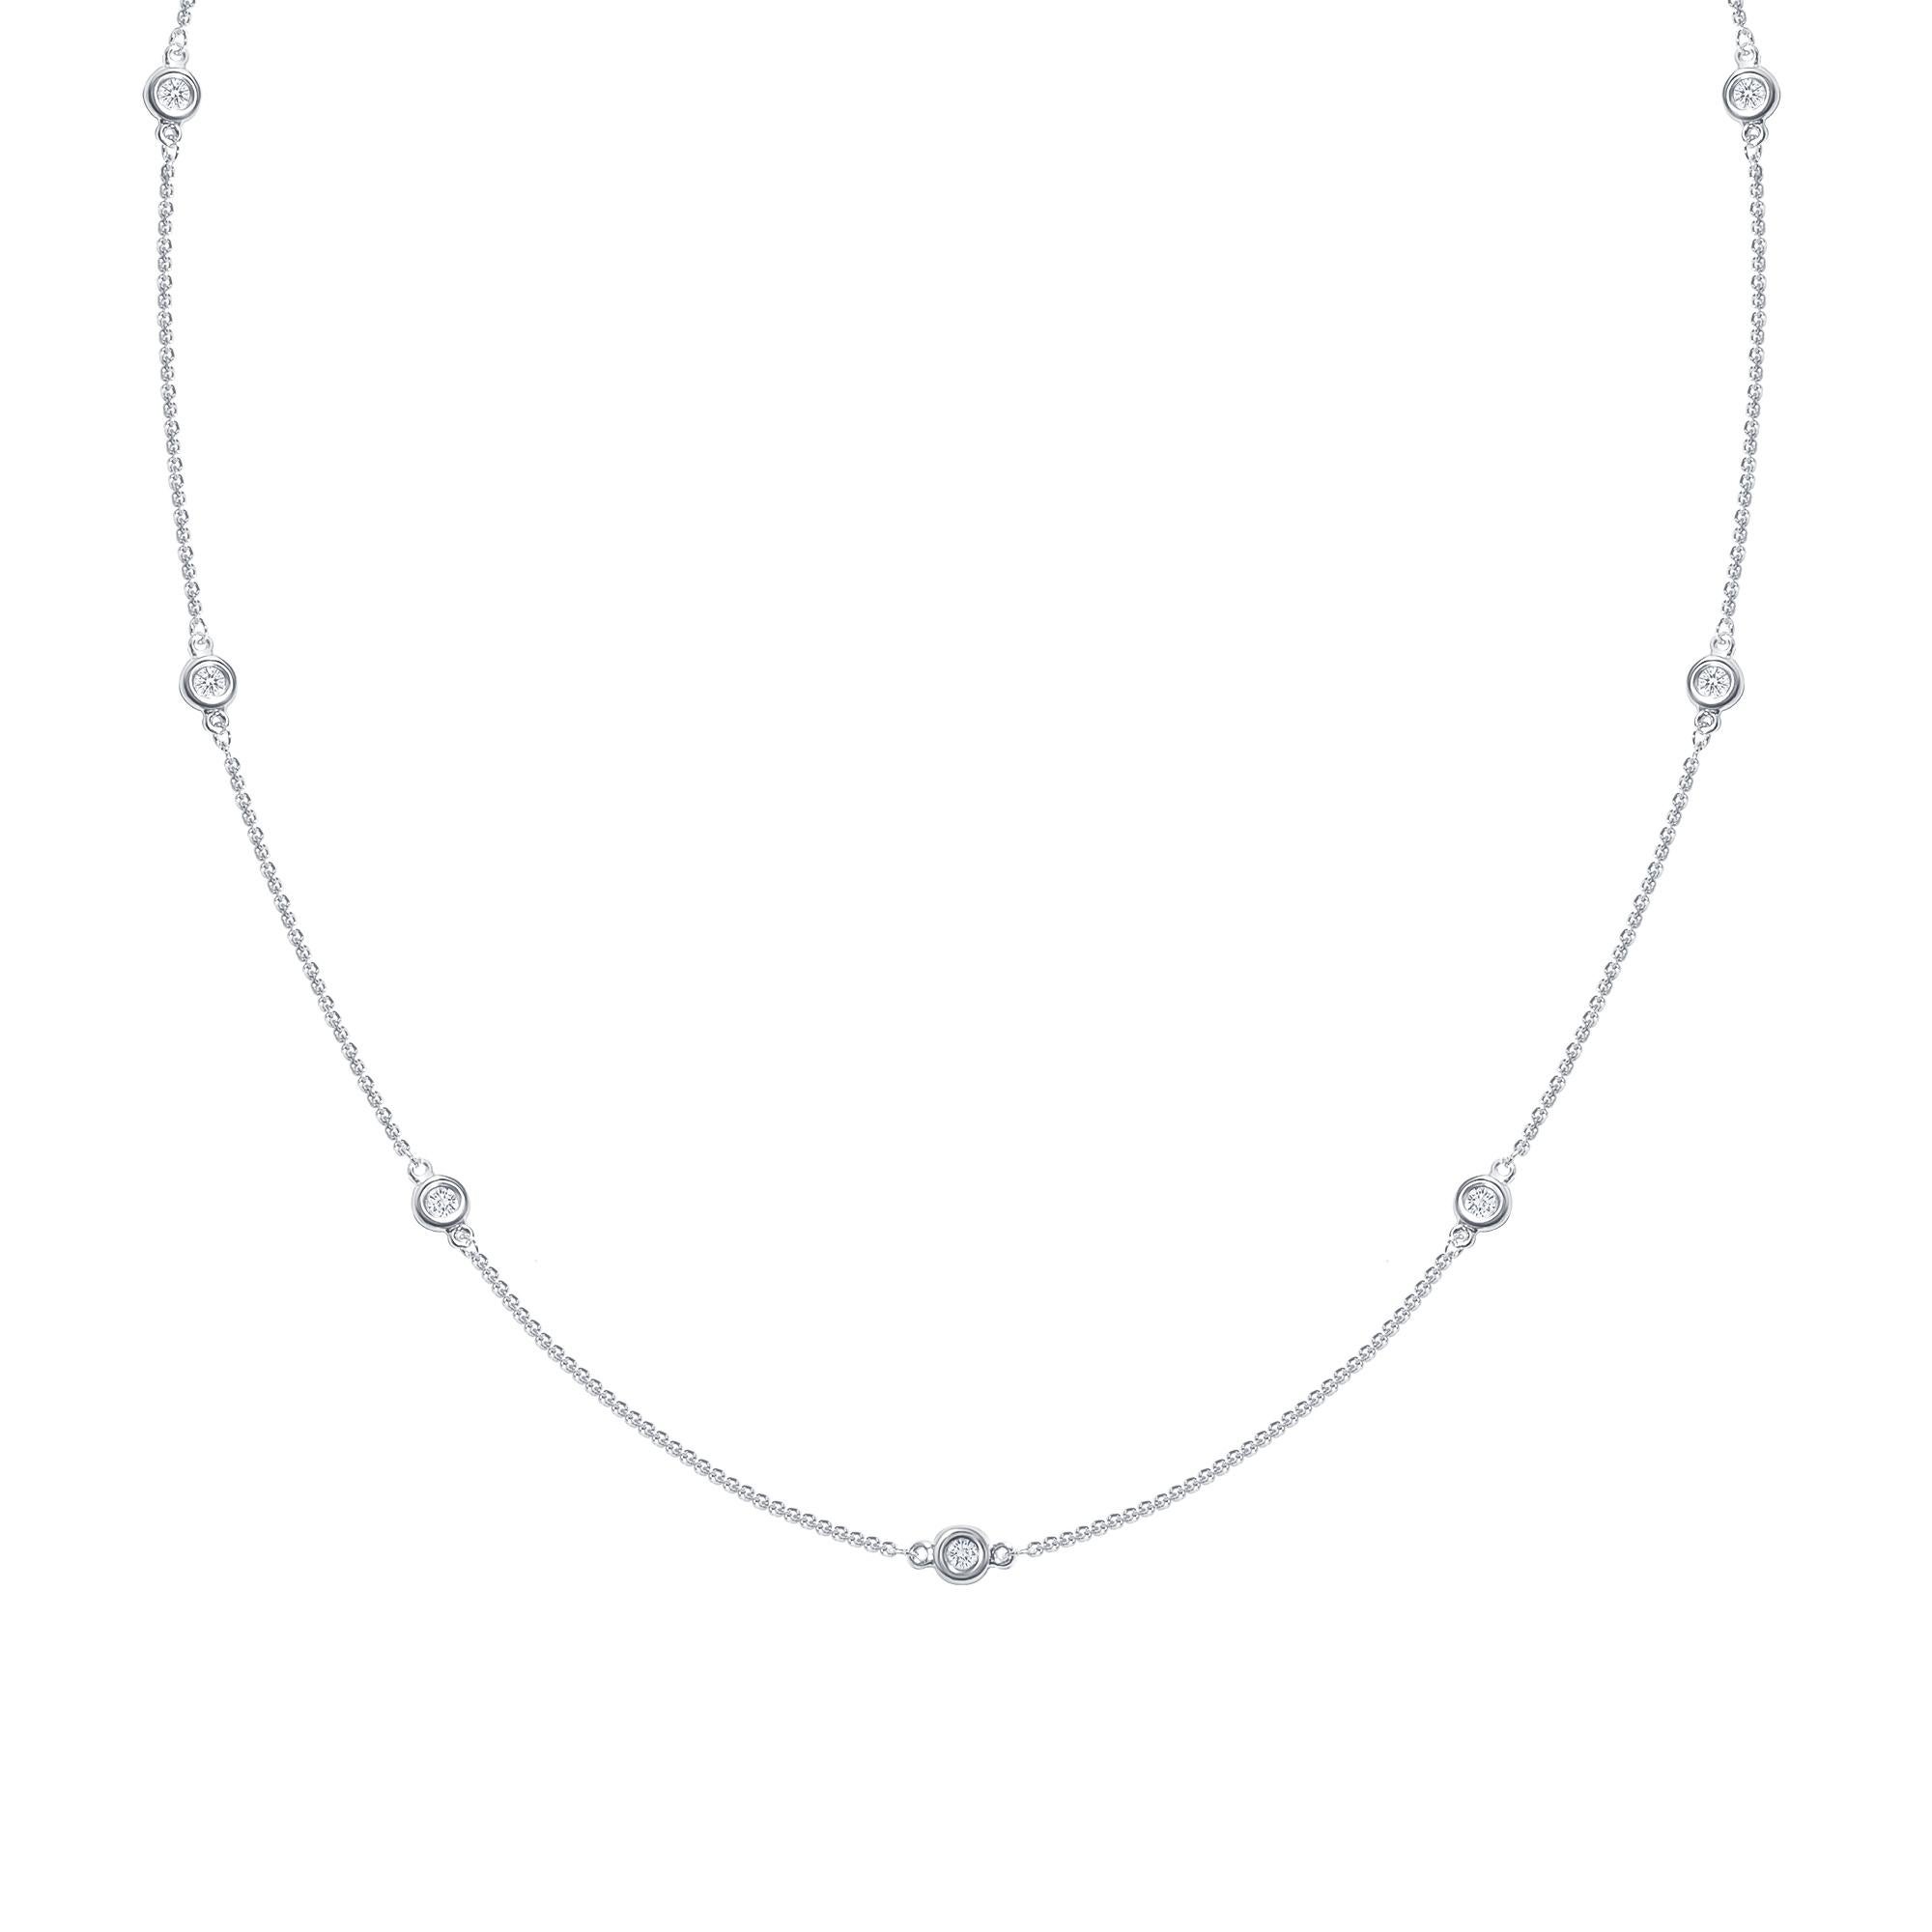 Eight elegant round diamonds set in a bezel setting along a 14k gold chain necklace.

Gold: 14K Gold
Number of Diamonds: Eight
Gold Color: White Gold
Carat: 2 Carat
Necklace Length: 16 Inches
Diamond Clarity: VS
Diamond Color: F
Chain Type: